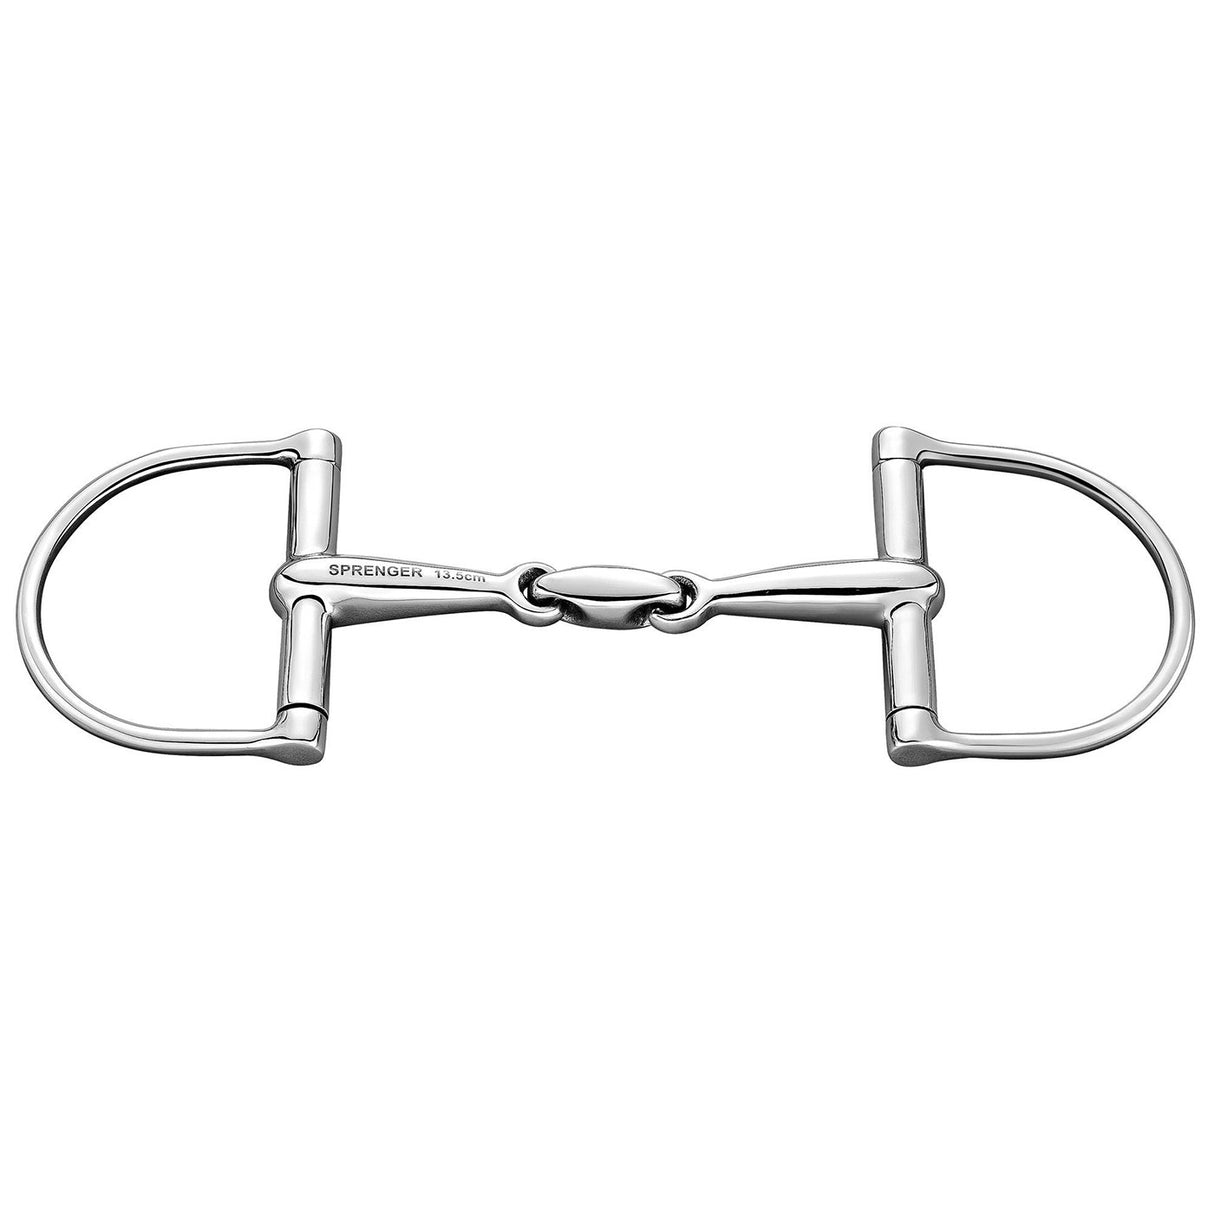 Sprenger D-Ring Double Jointed Snaffle Bit - 16 mm